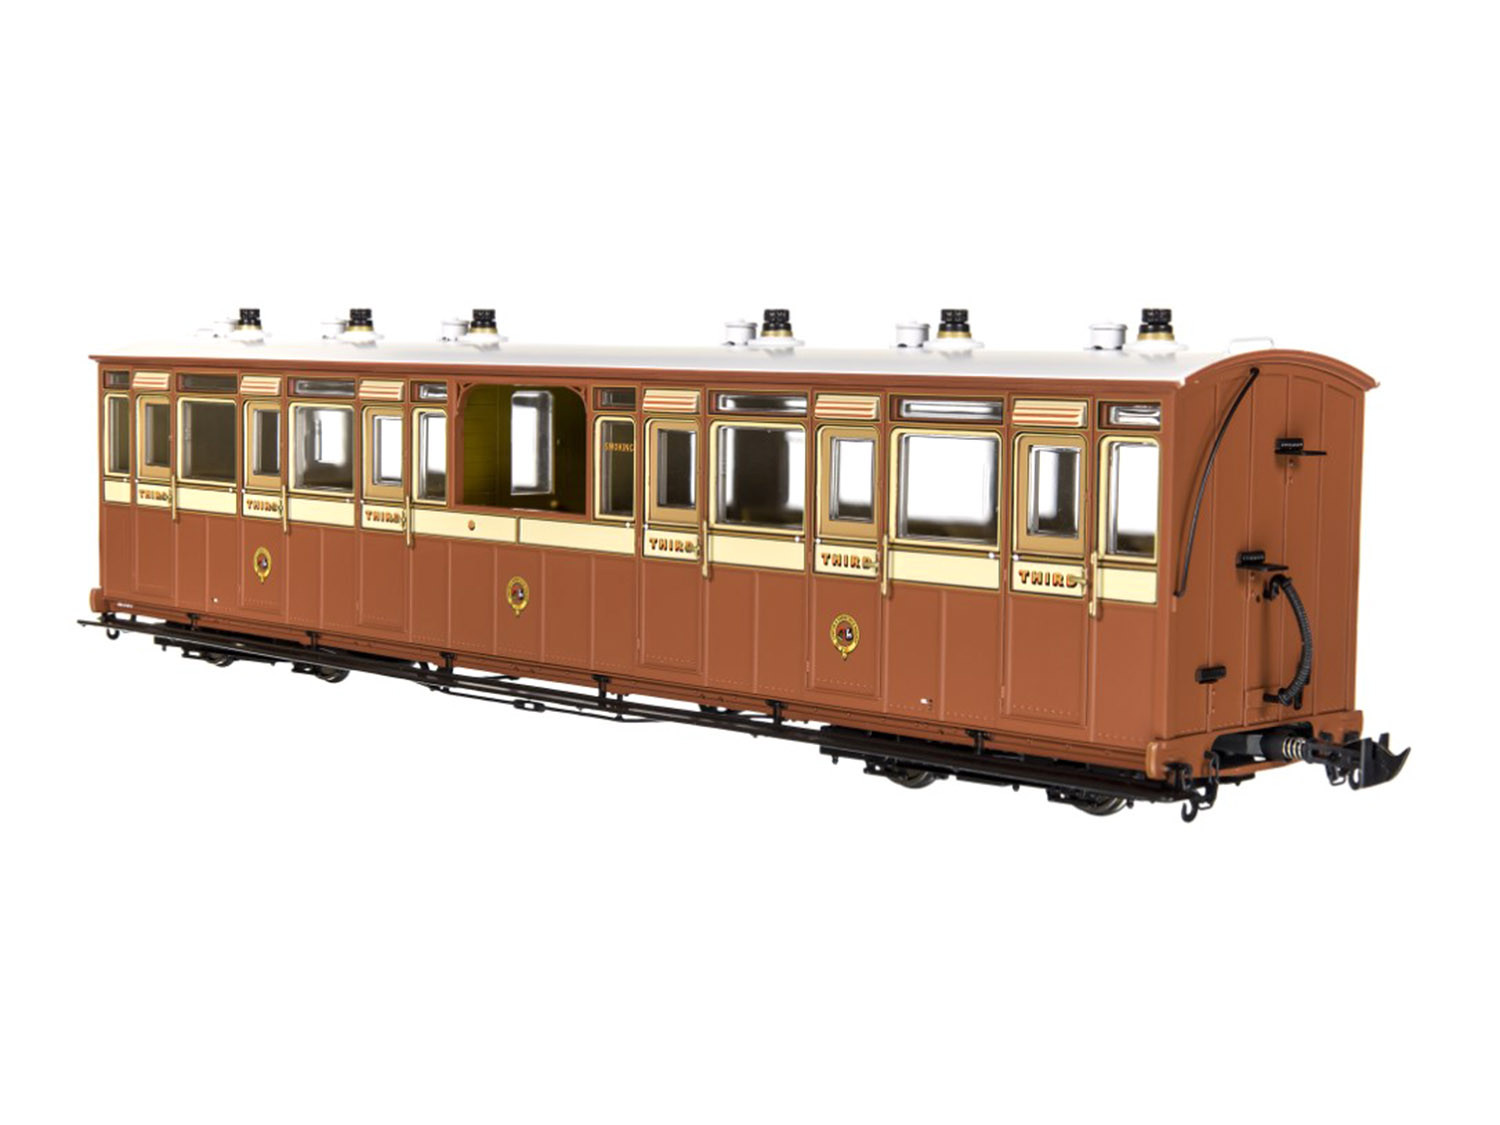 L&B Open 3rd Coach No.8 1897-1901 (DCC-Fitted)